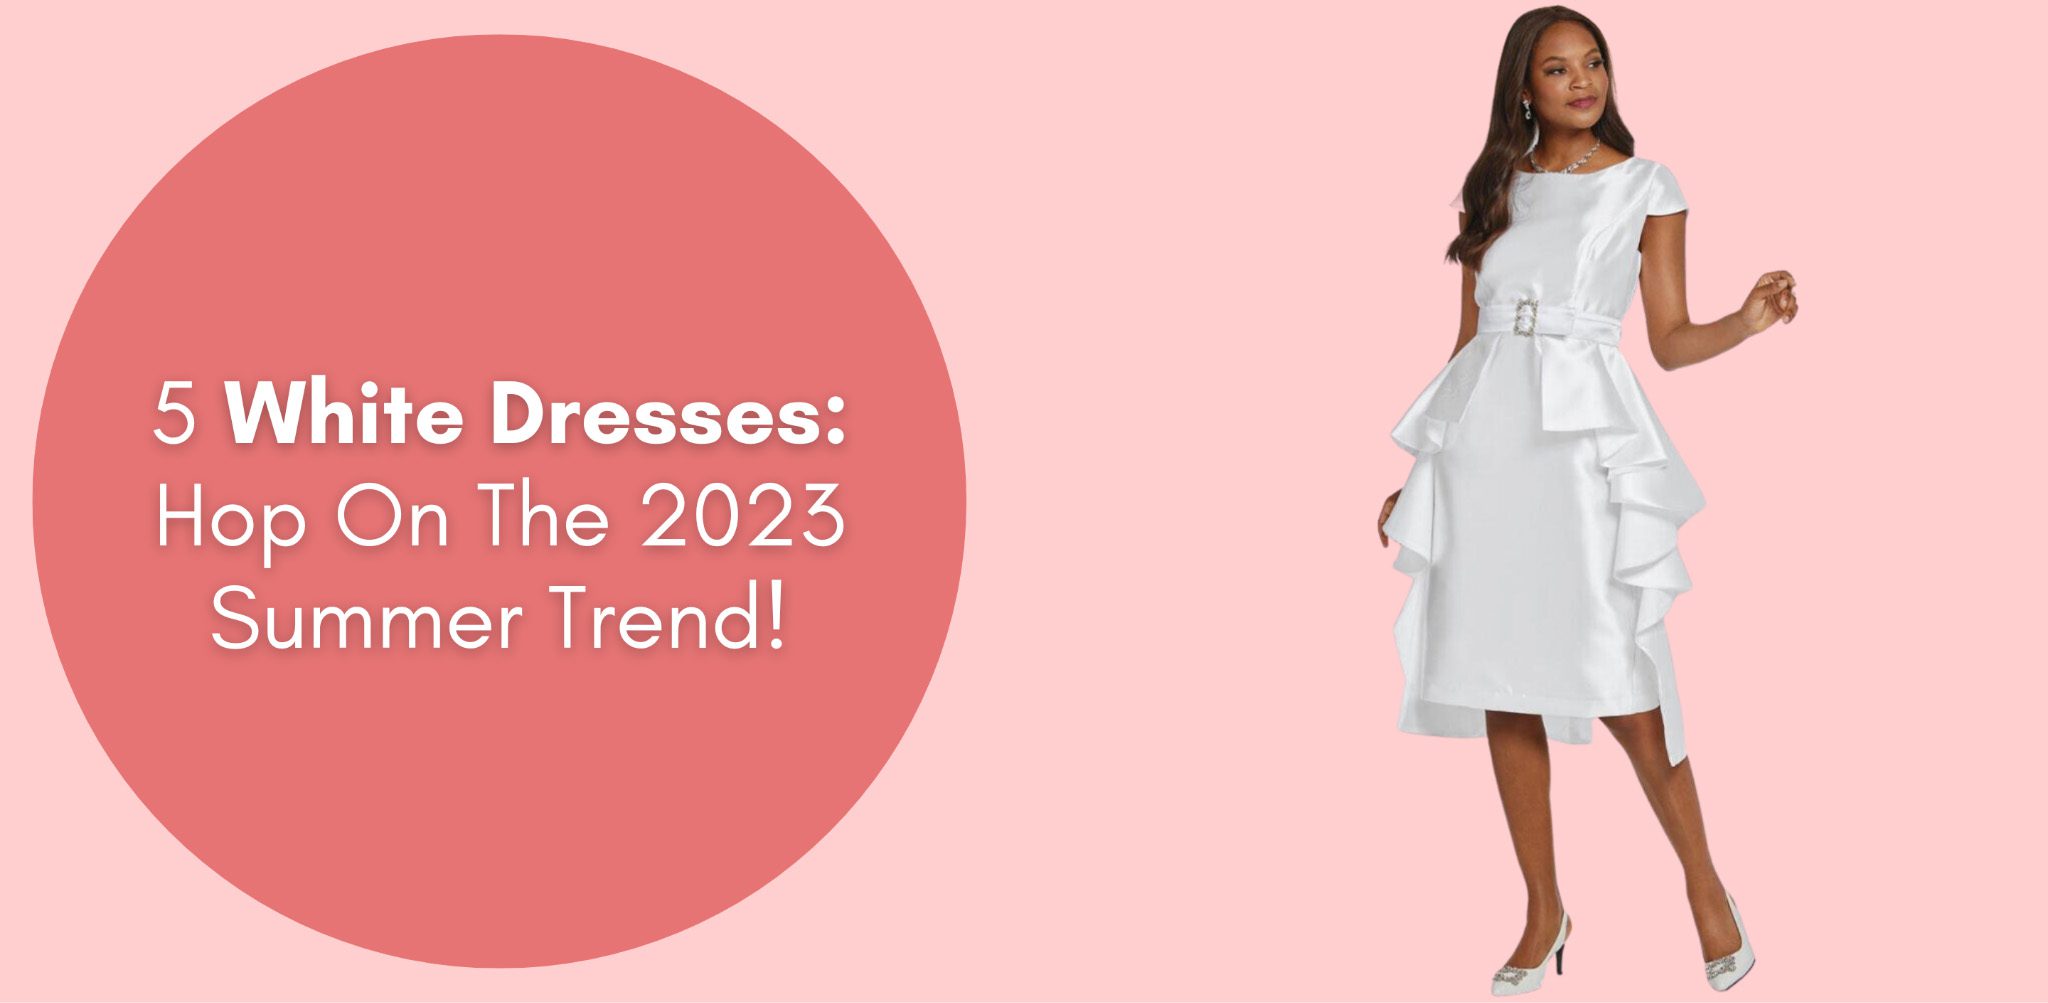 5 White Dresses: Hop On The 2023 Summer Trend! | Especially Yours